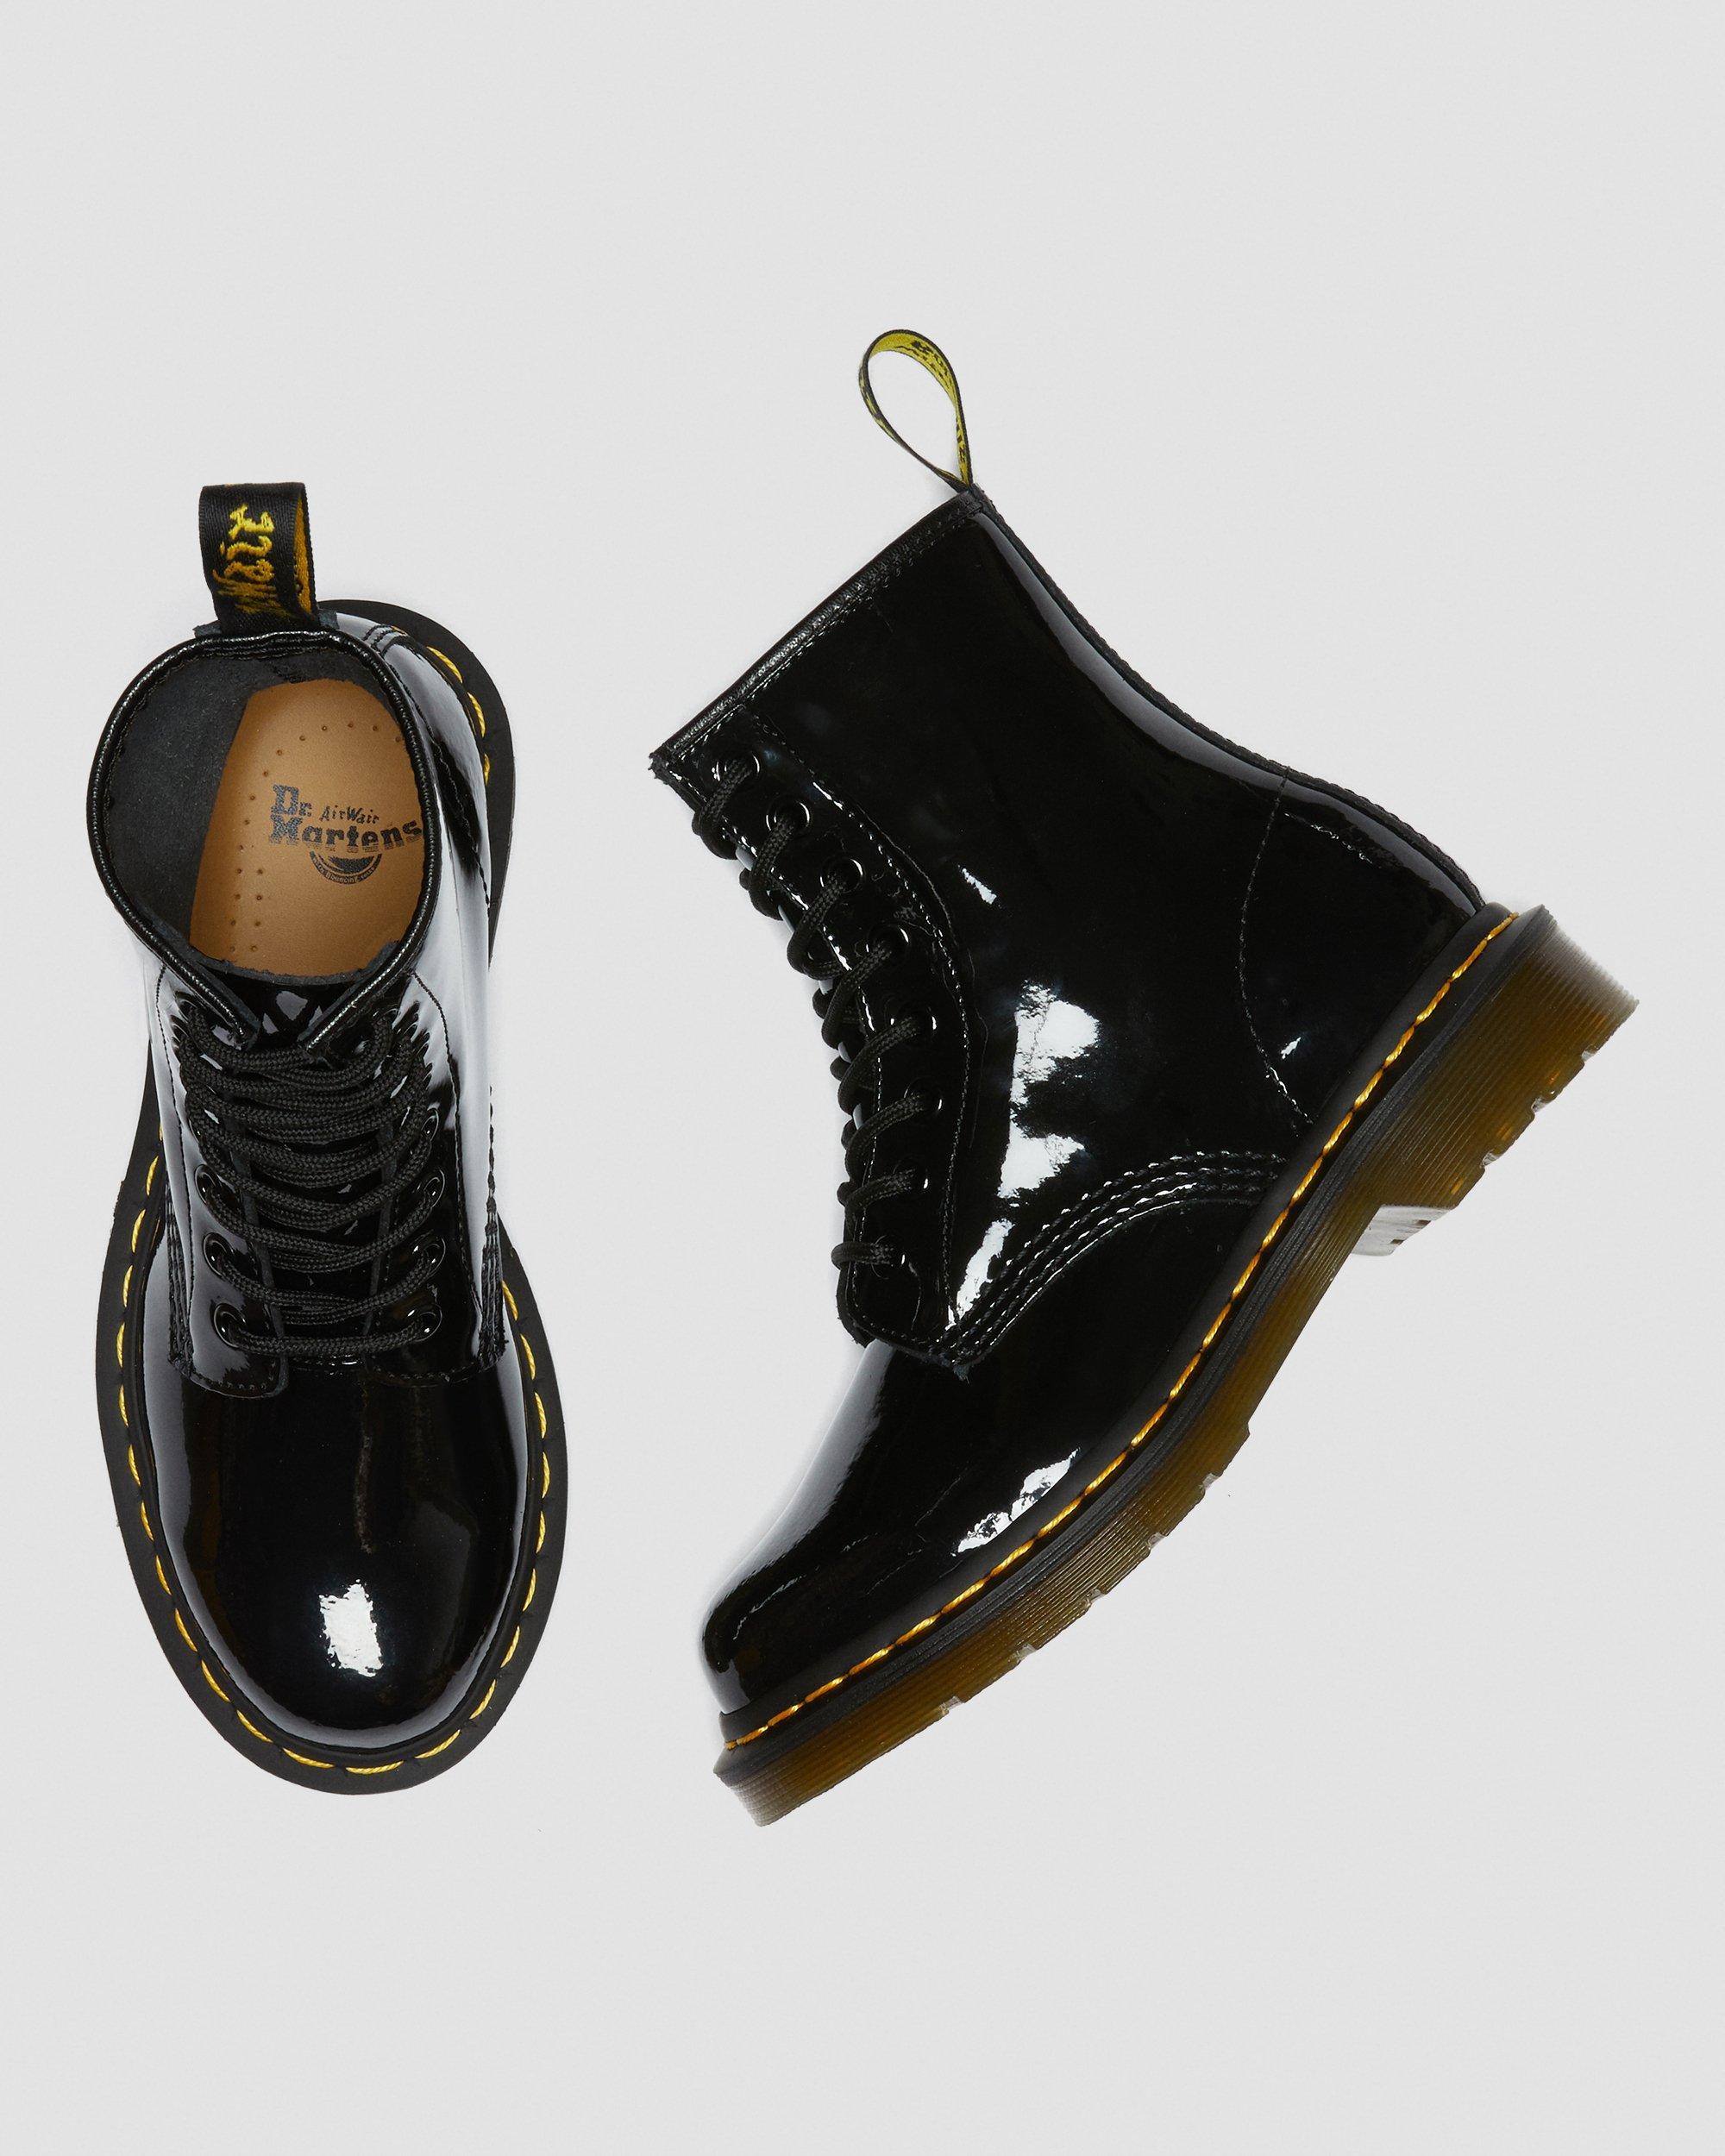 Dr. Martens 1460 Leather Boots Black Patent Lamper - Save 13% | Lyst